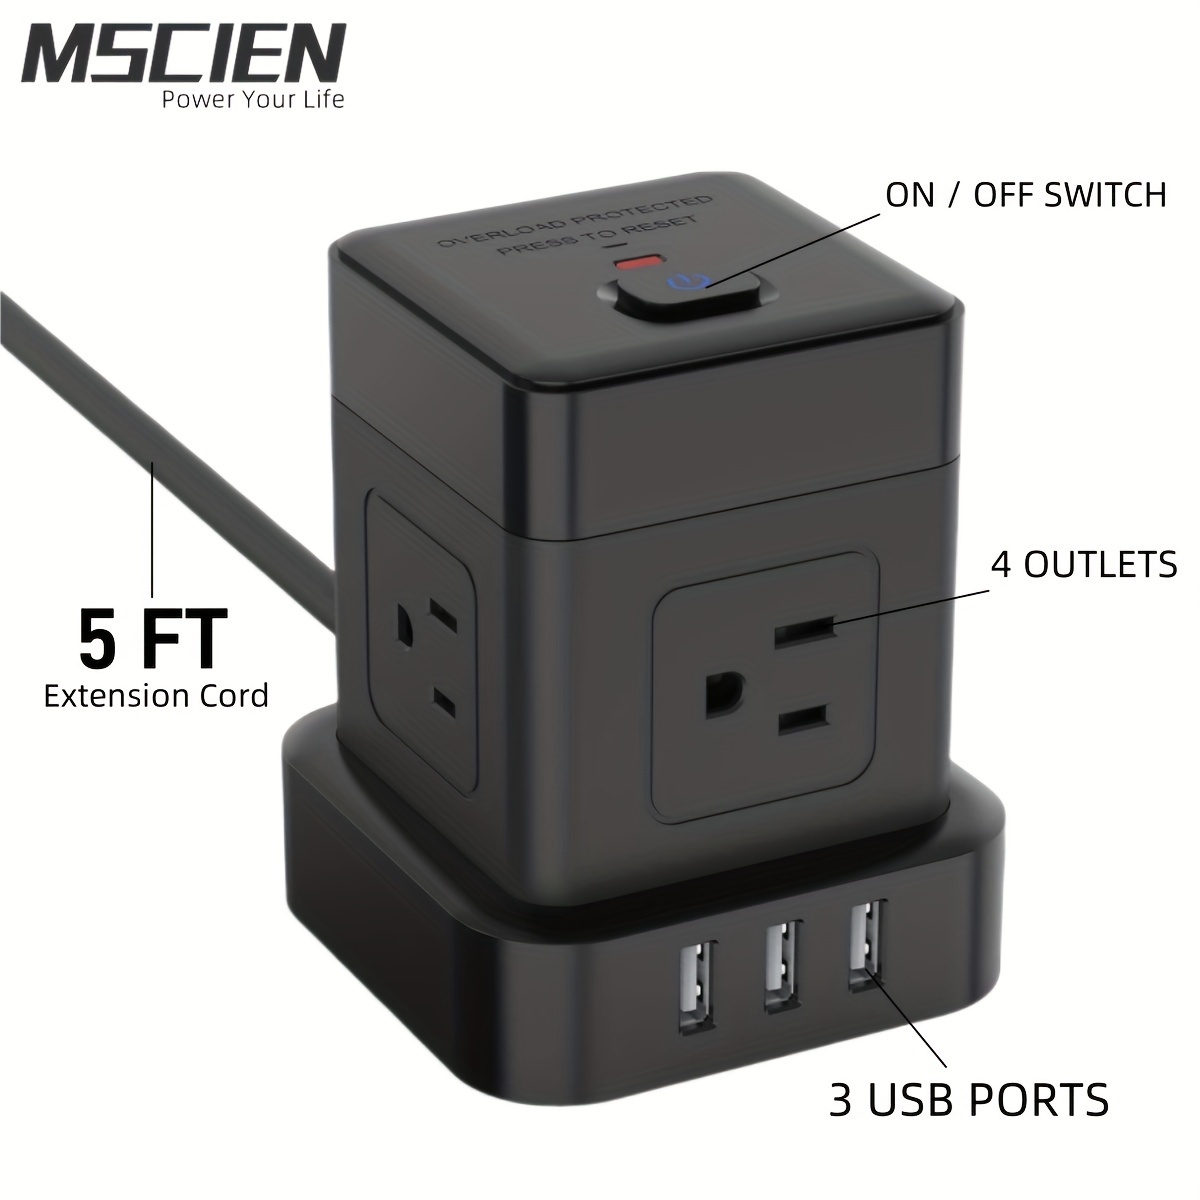 

Us Plug Power Strip Cube Socket 4 Outlet 3 Usb Ports 5 Ft Extension Cord Protector For Home, Kitchen, Office, Travel